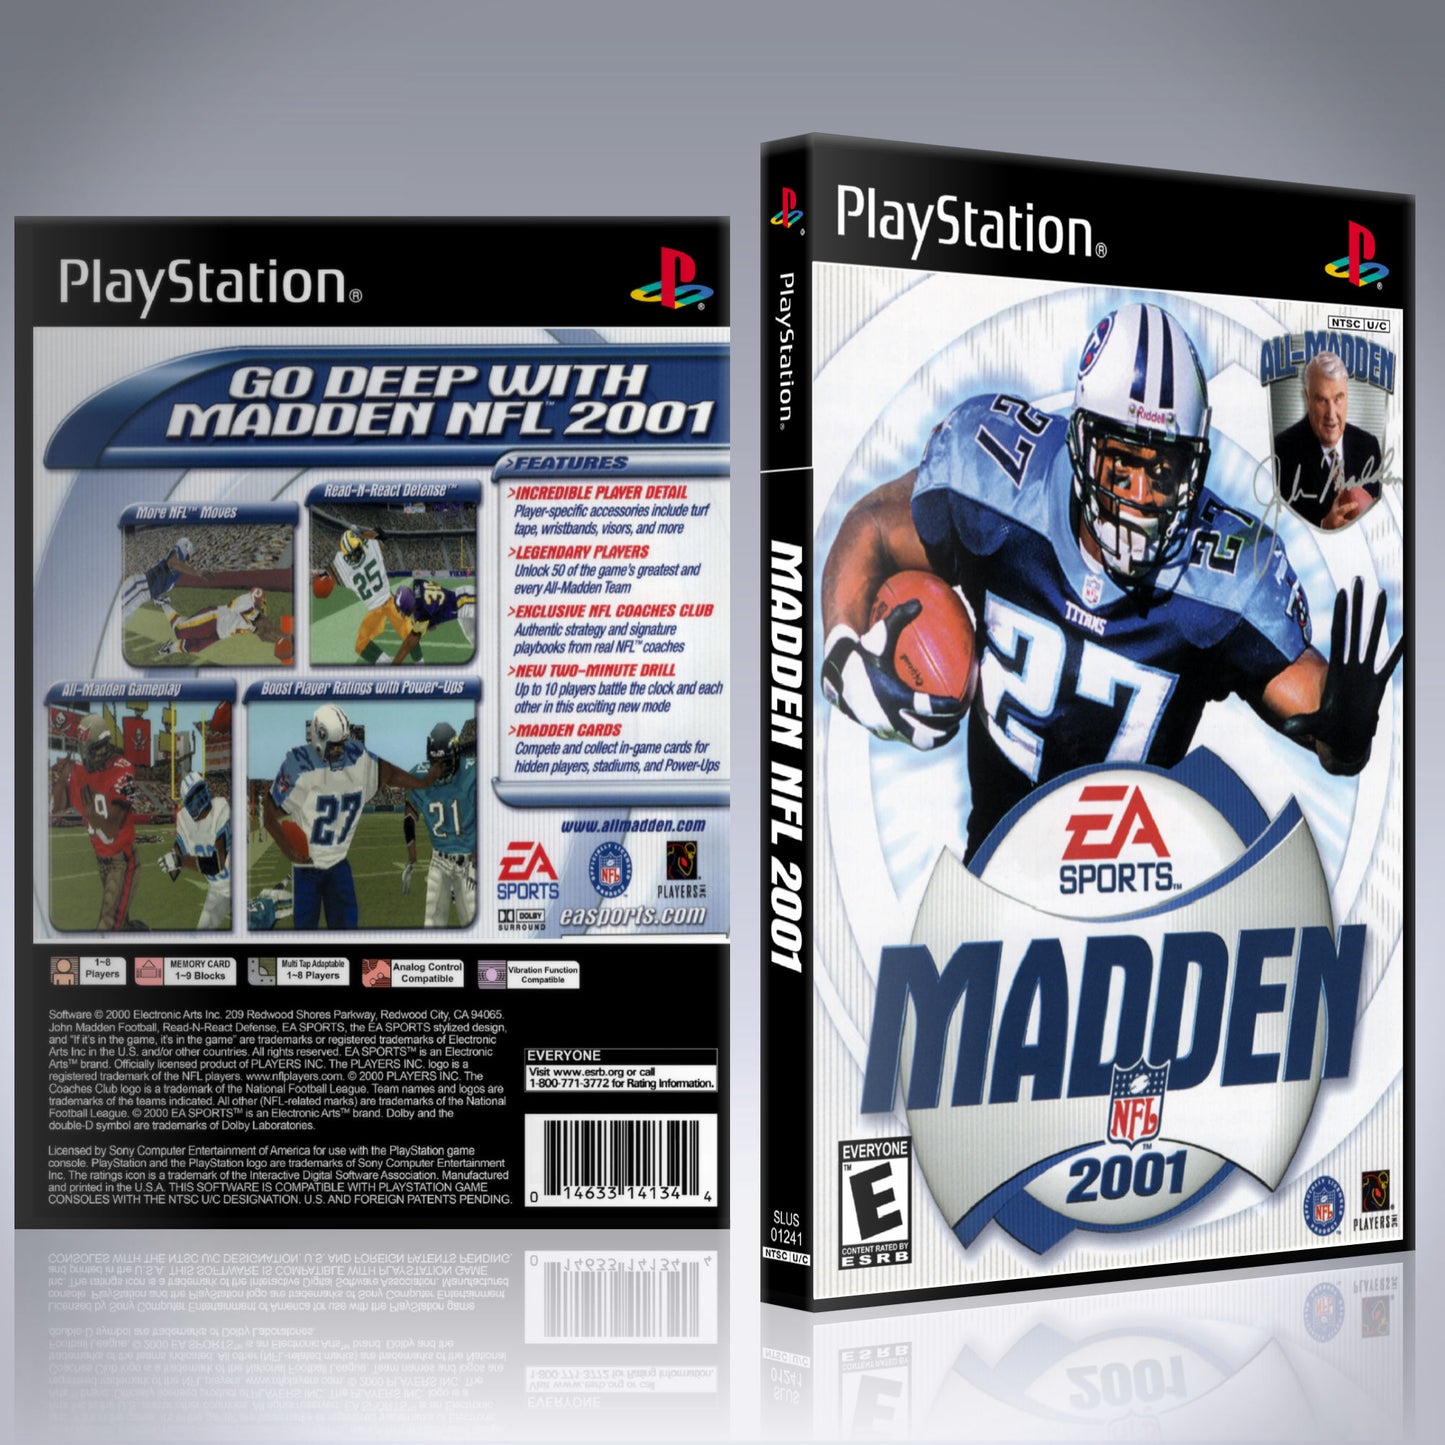 PS1 Case - NO GAME - Madden NFL 2001